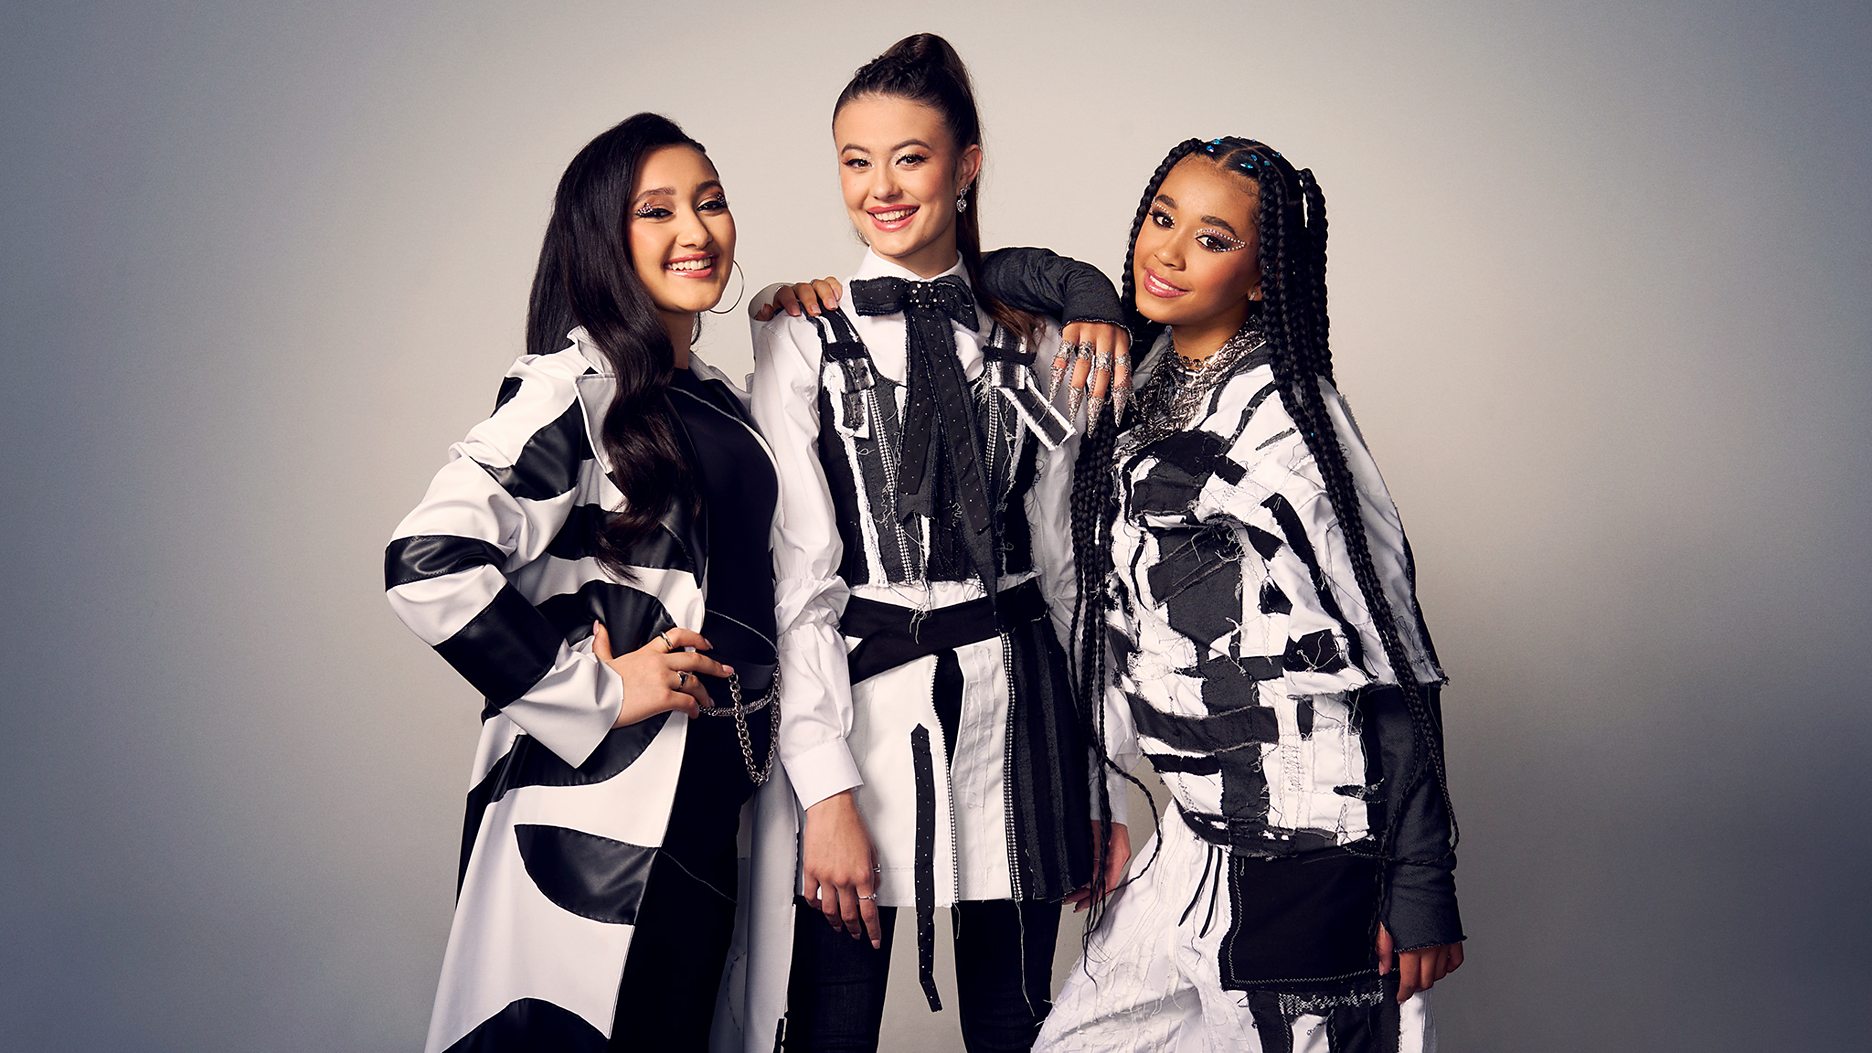 STAND UNIQU3 to represent the UK at The Junior Eurovision Song Contest 2023 with song Back To Life